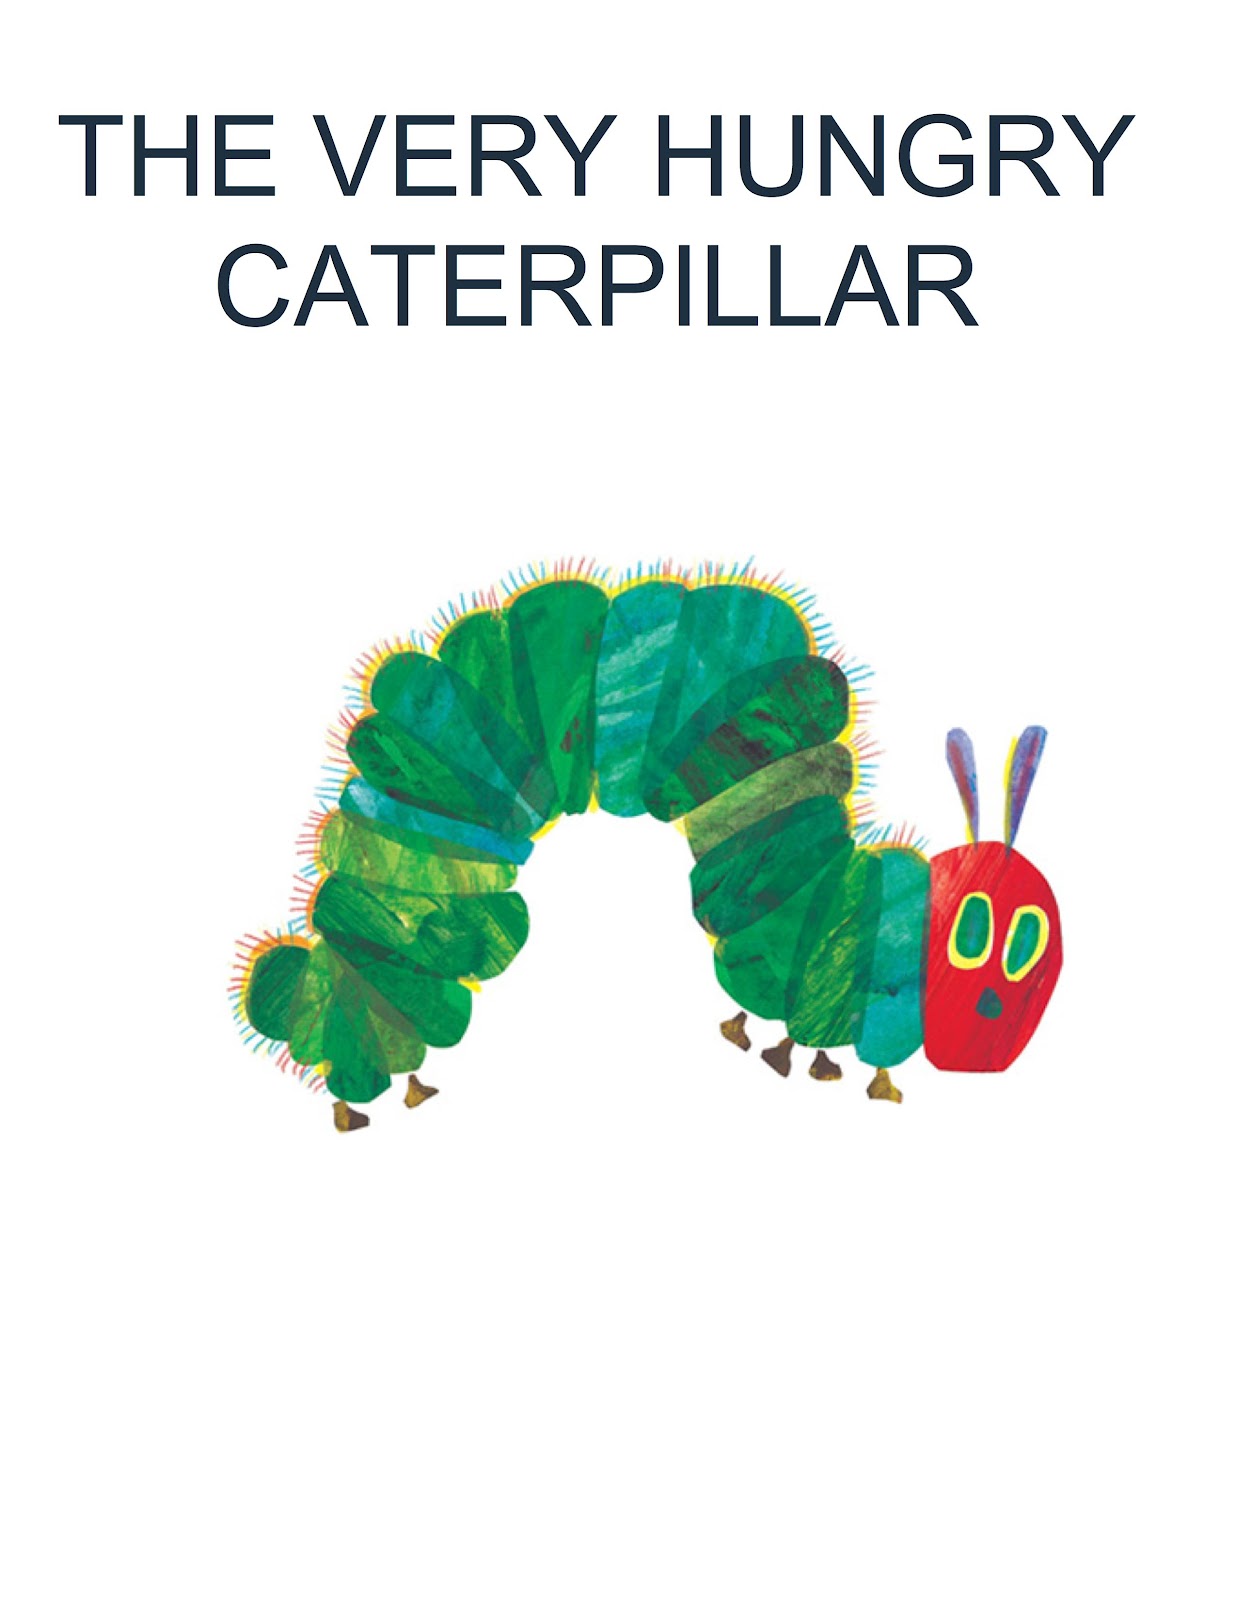 The Very Hungry Caterpillar Quotes. QuotesGram